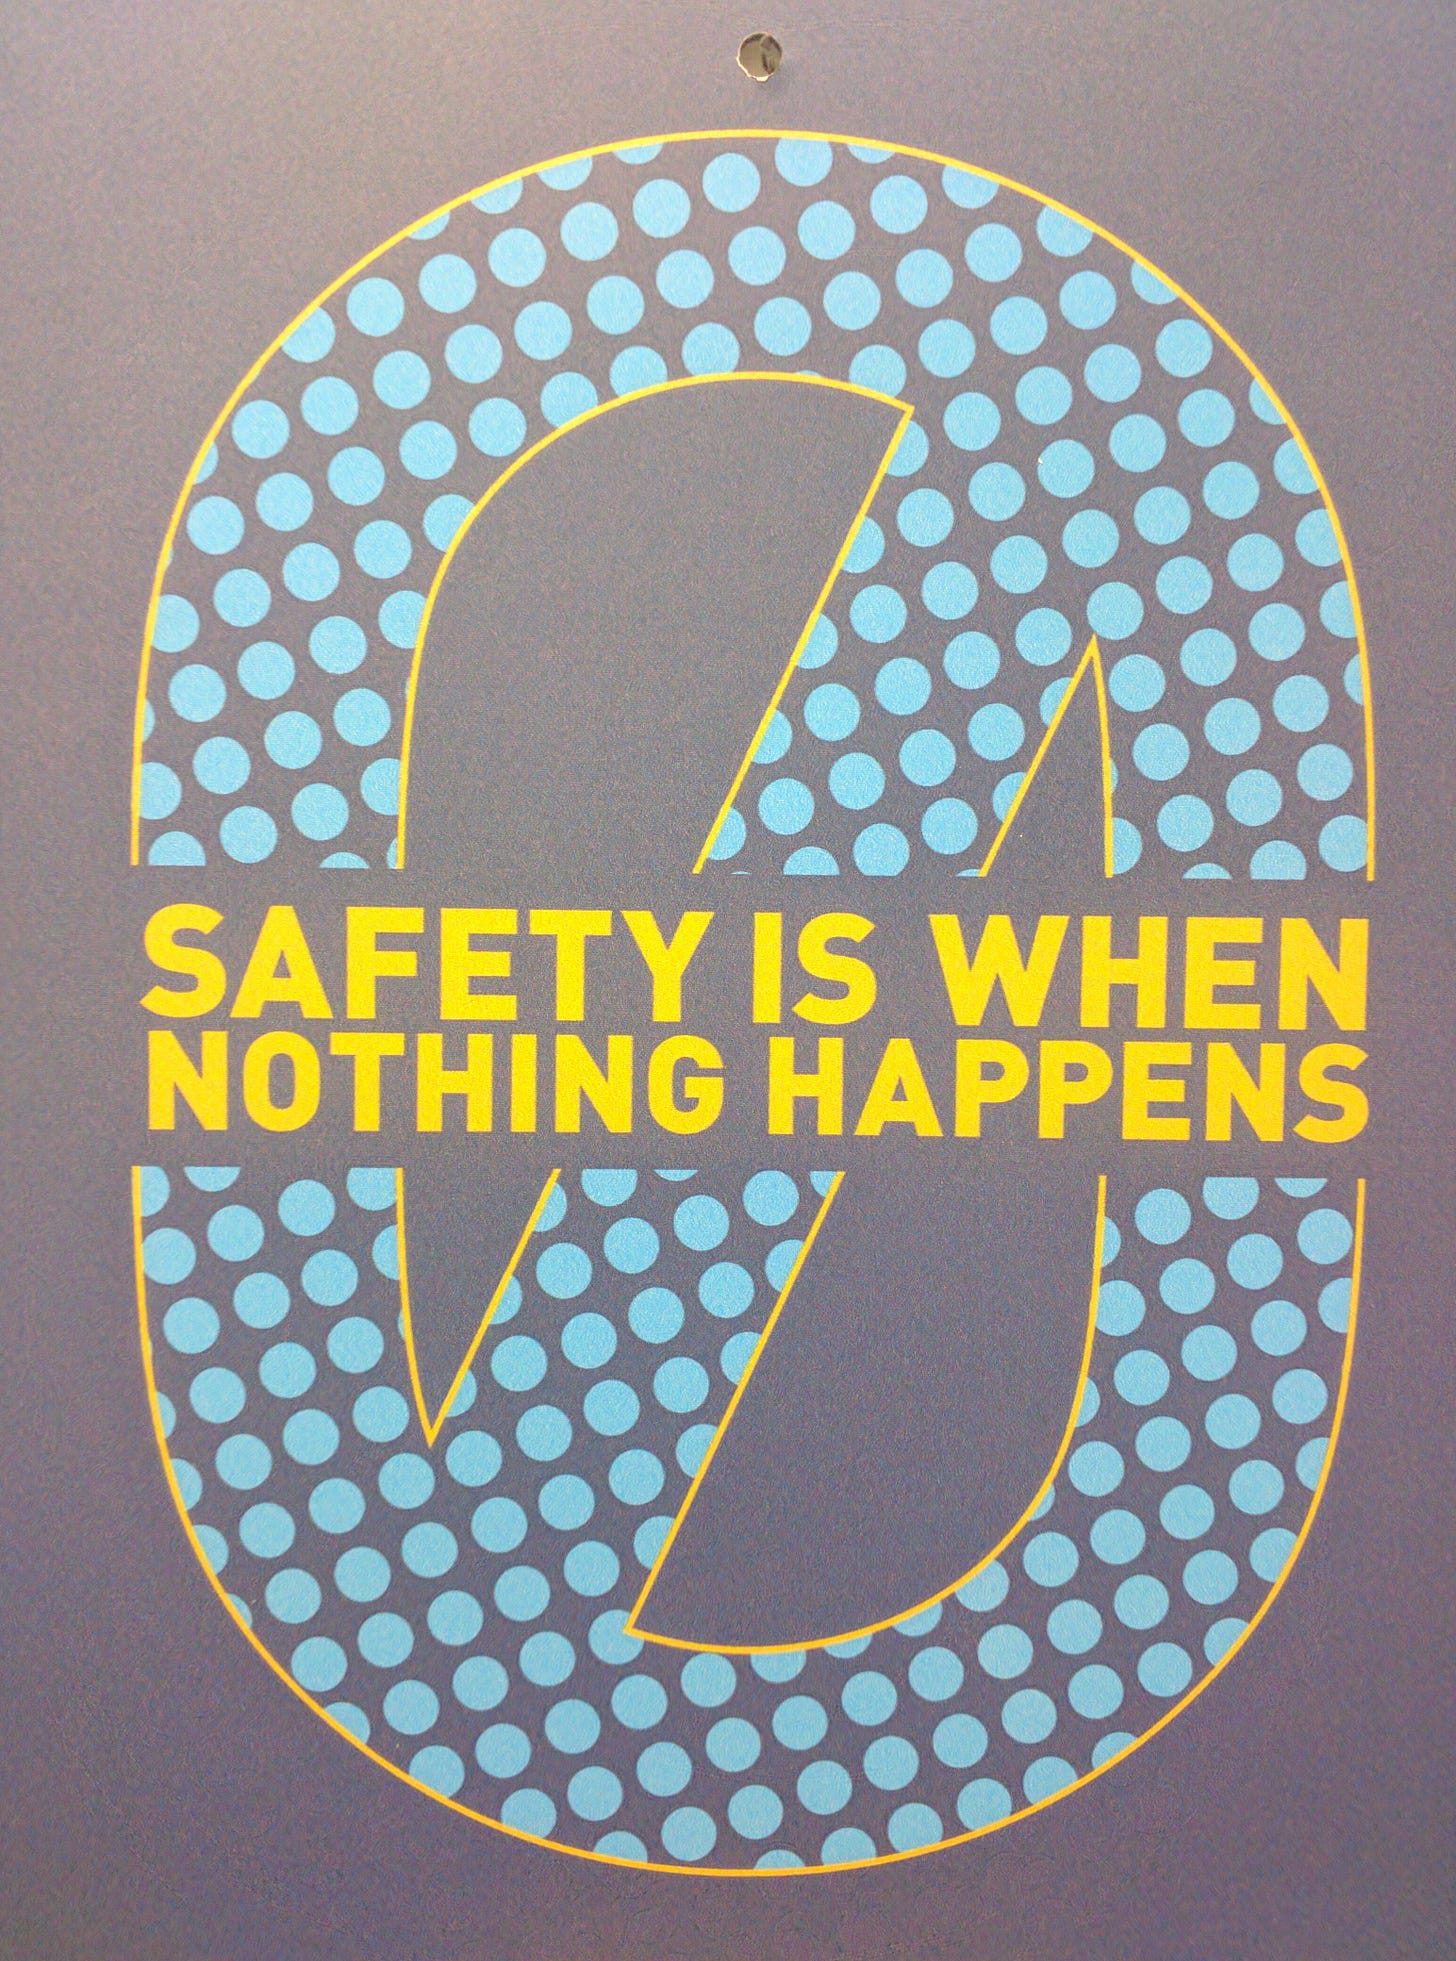 A sign with a circle with line and the text "Safety is when nothing happens"